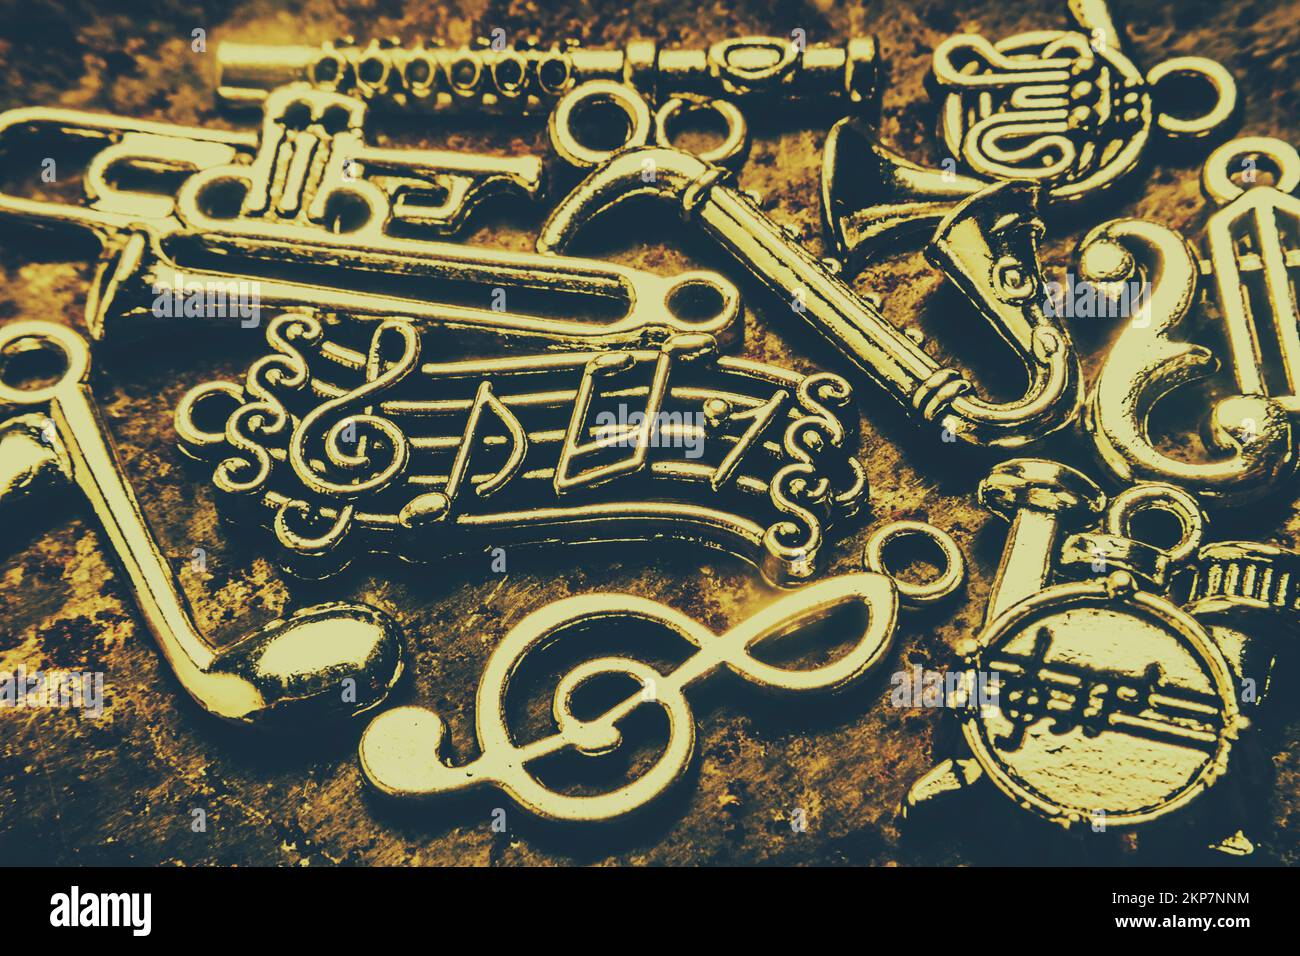 Antique toned artwork on a variety of music signs and symbols in poster play Stock Photo